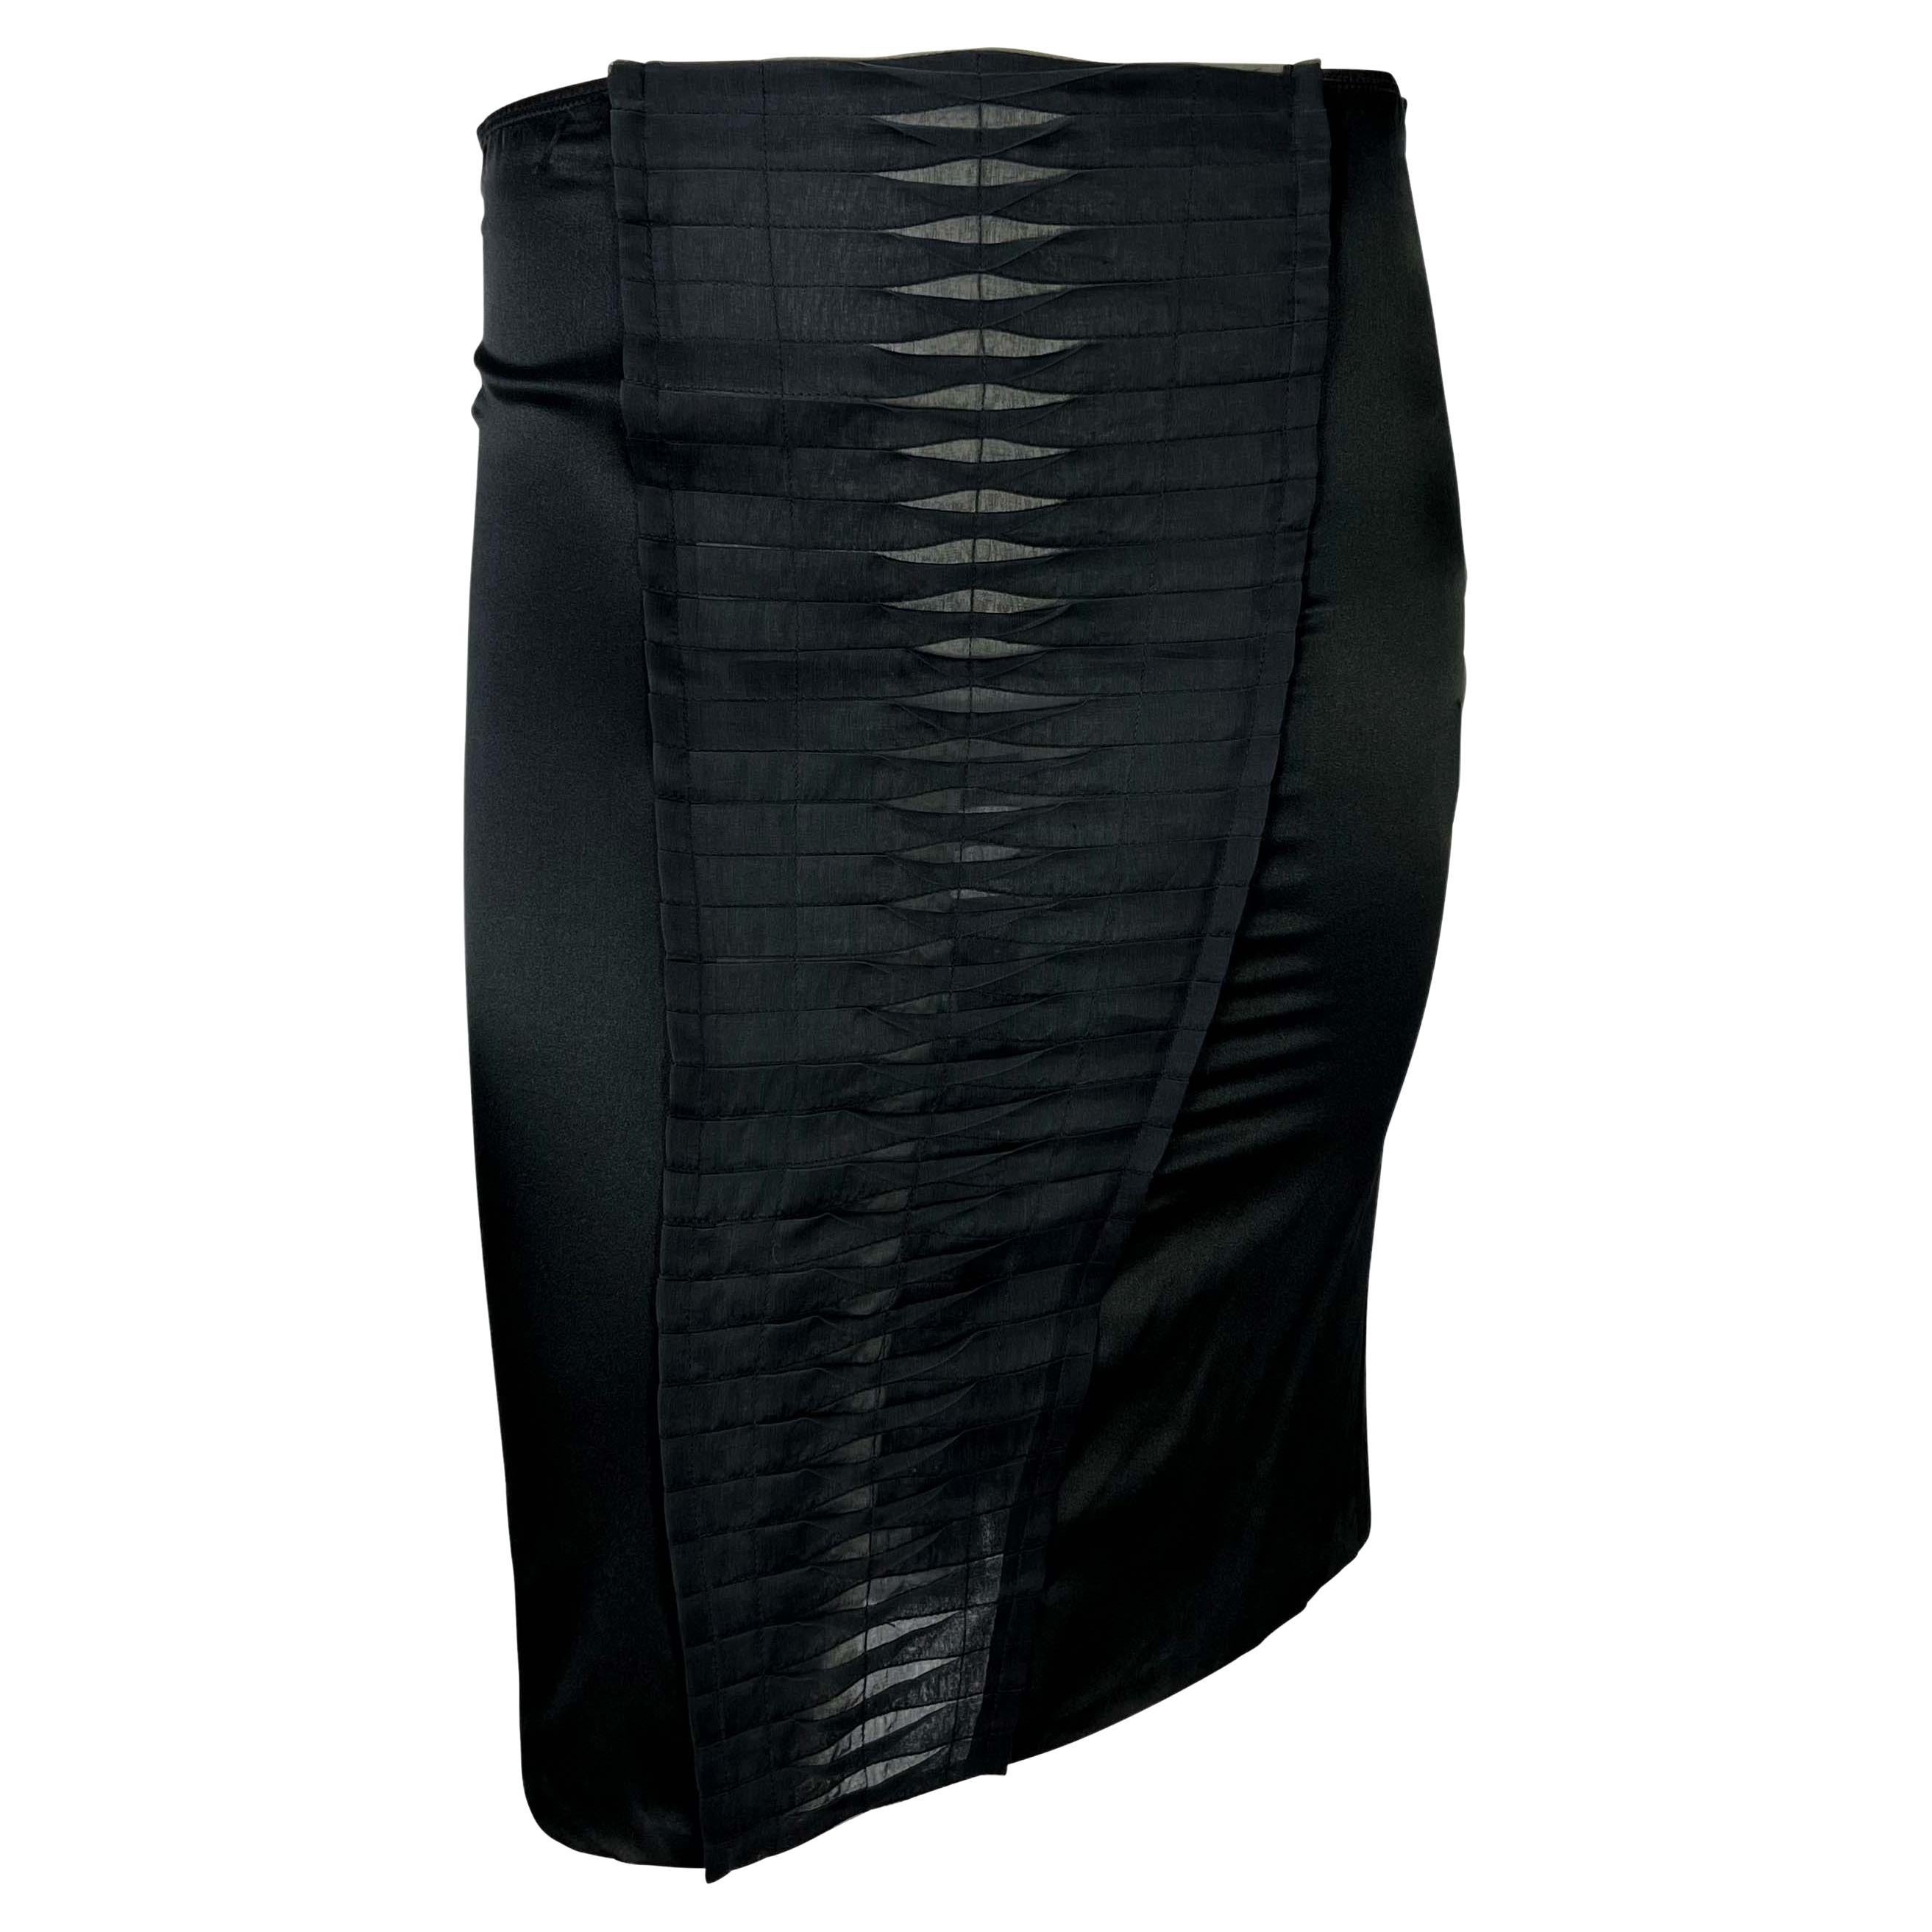 S/S 2004 Gucci by Tom Ford Black Pleated Sheer Tapered Stretch Wiggle Skirt For Sale 2